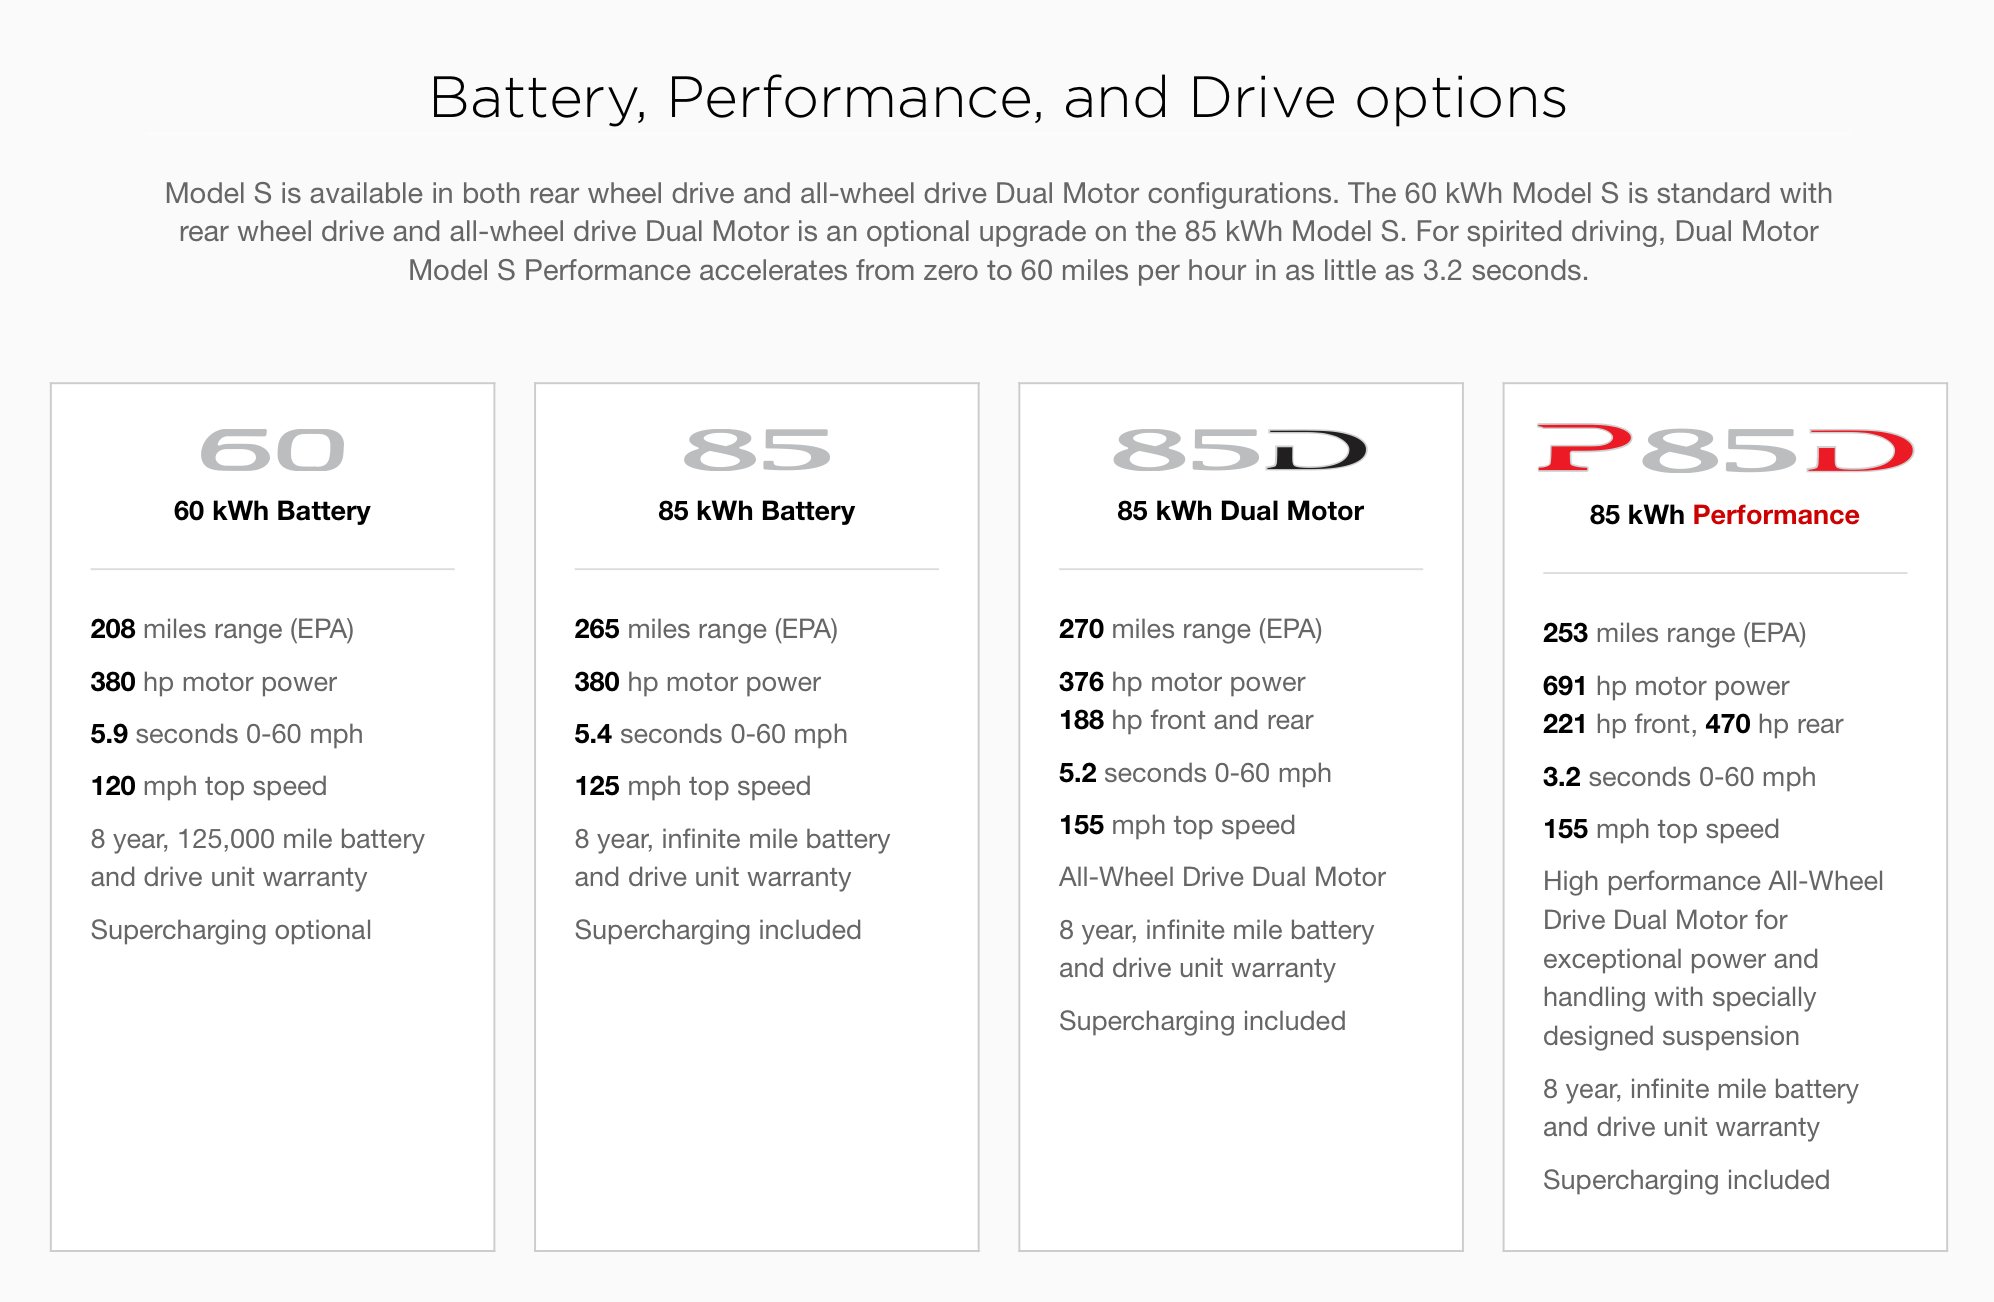 Does anyone know when the 2015 Drive Unit warranty expires? | Tesla Motors  Club